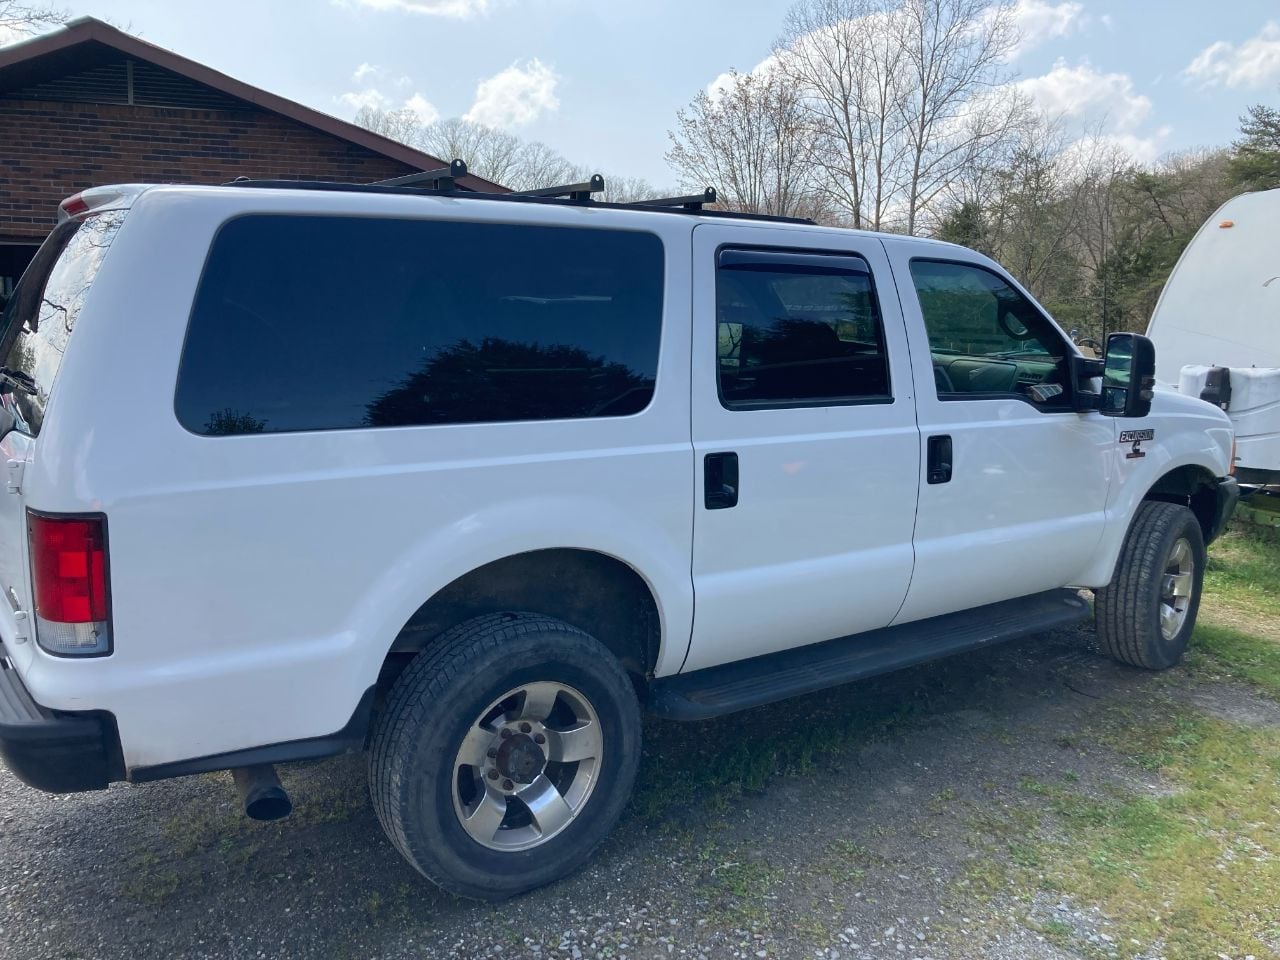 2000 Ford Excursion - 2000 Excursion with Cummins Swap - Used - VIN 1FMNU43S2YEB26112 - 6 cyl - 4WD - Automatic - SUV - White - Knoxville, TN 37901, United States